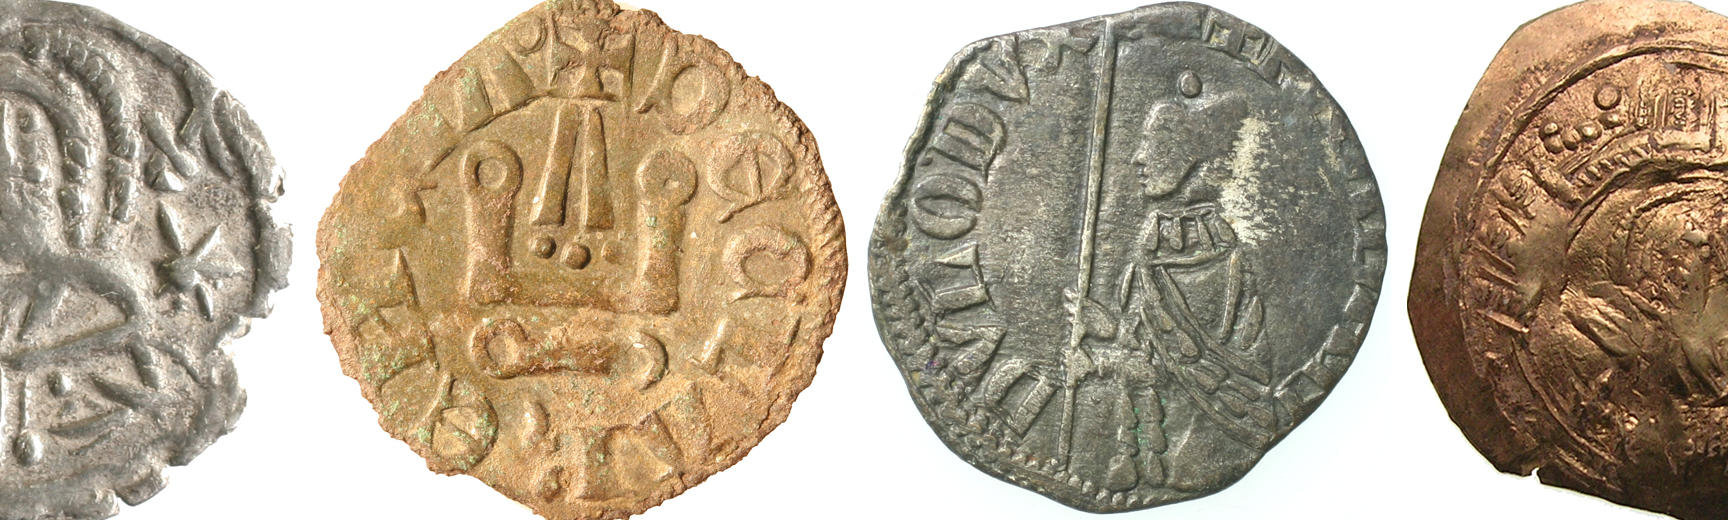 A selection of coins demonstrating the monetary systems in use in 14th century Constantinople 